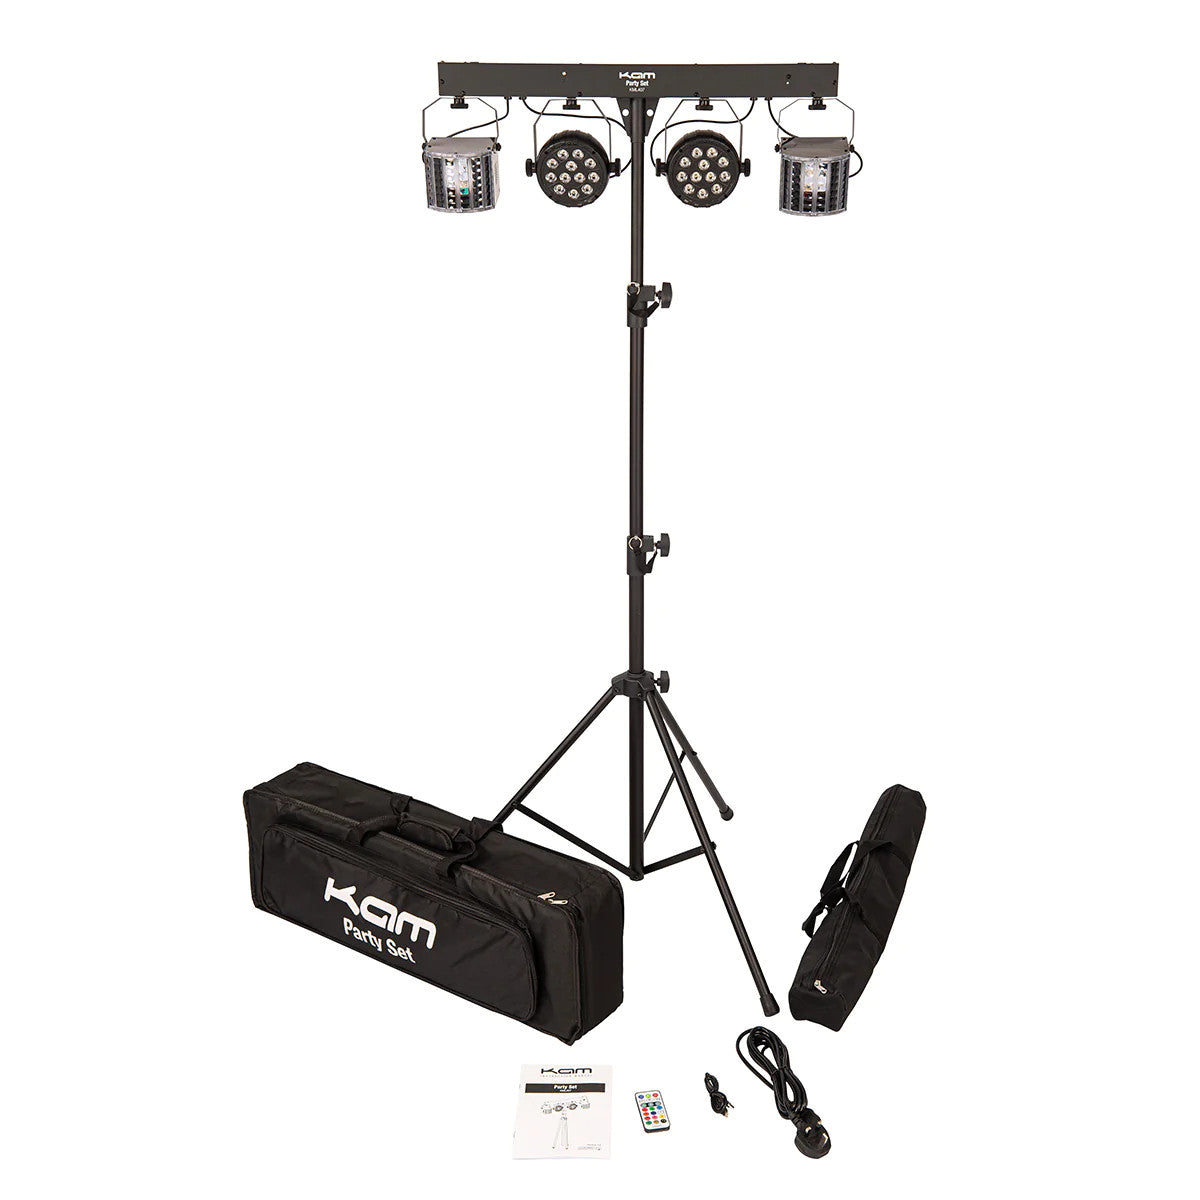 Deals on Stage and Studio gear in Maplin's Easter Sale!